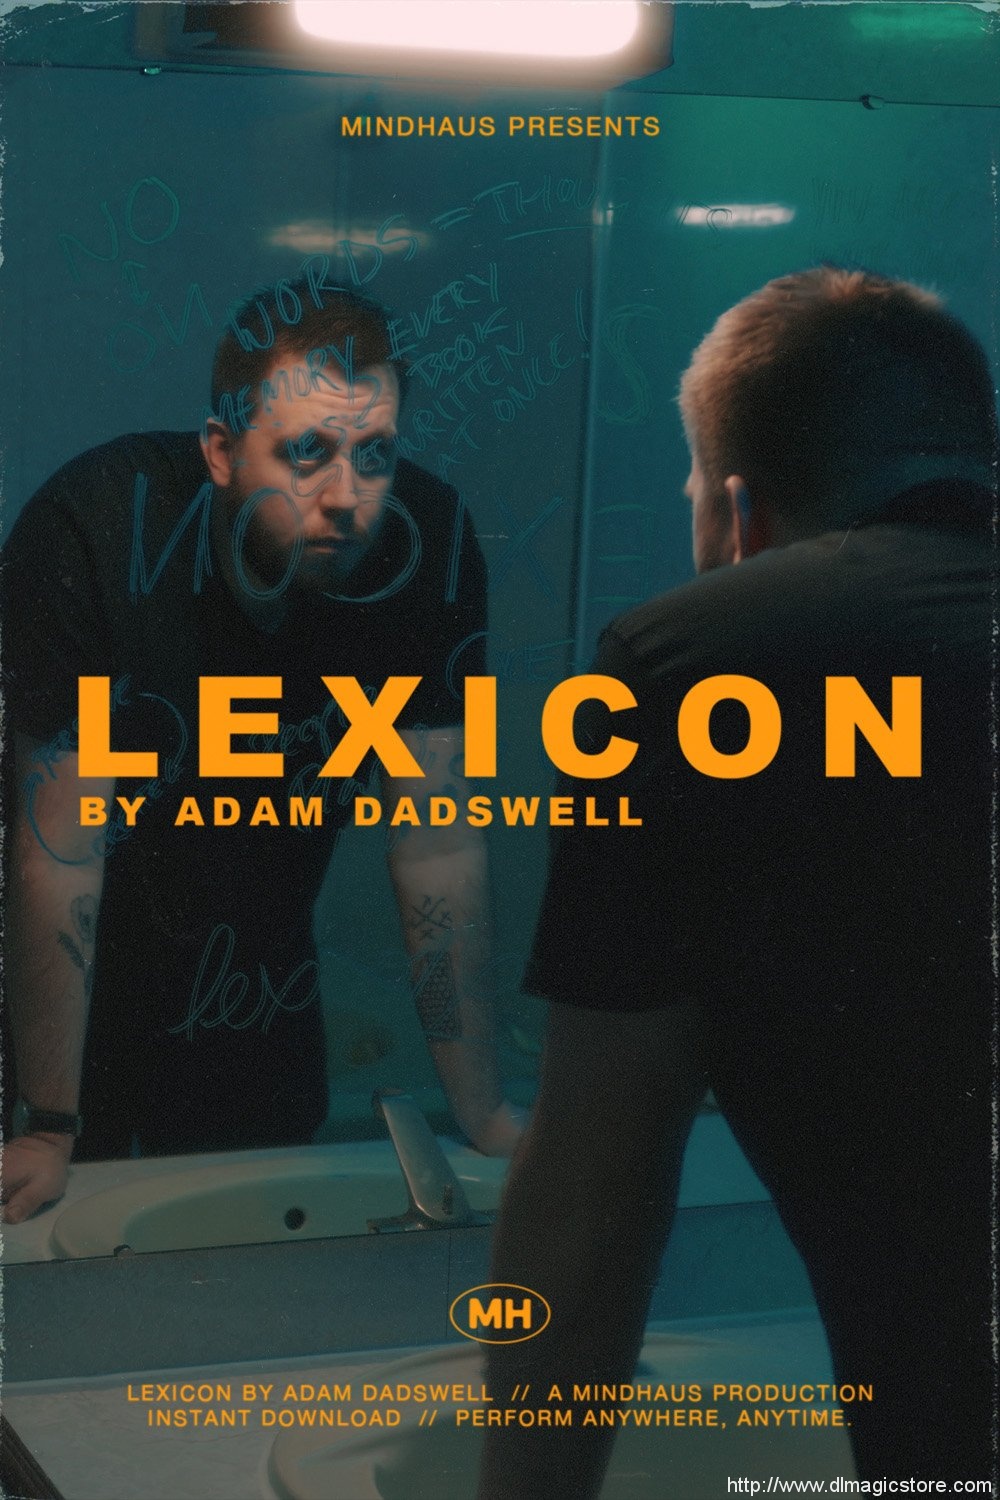 Adam Dadswell – Lexicon